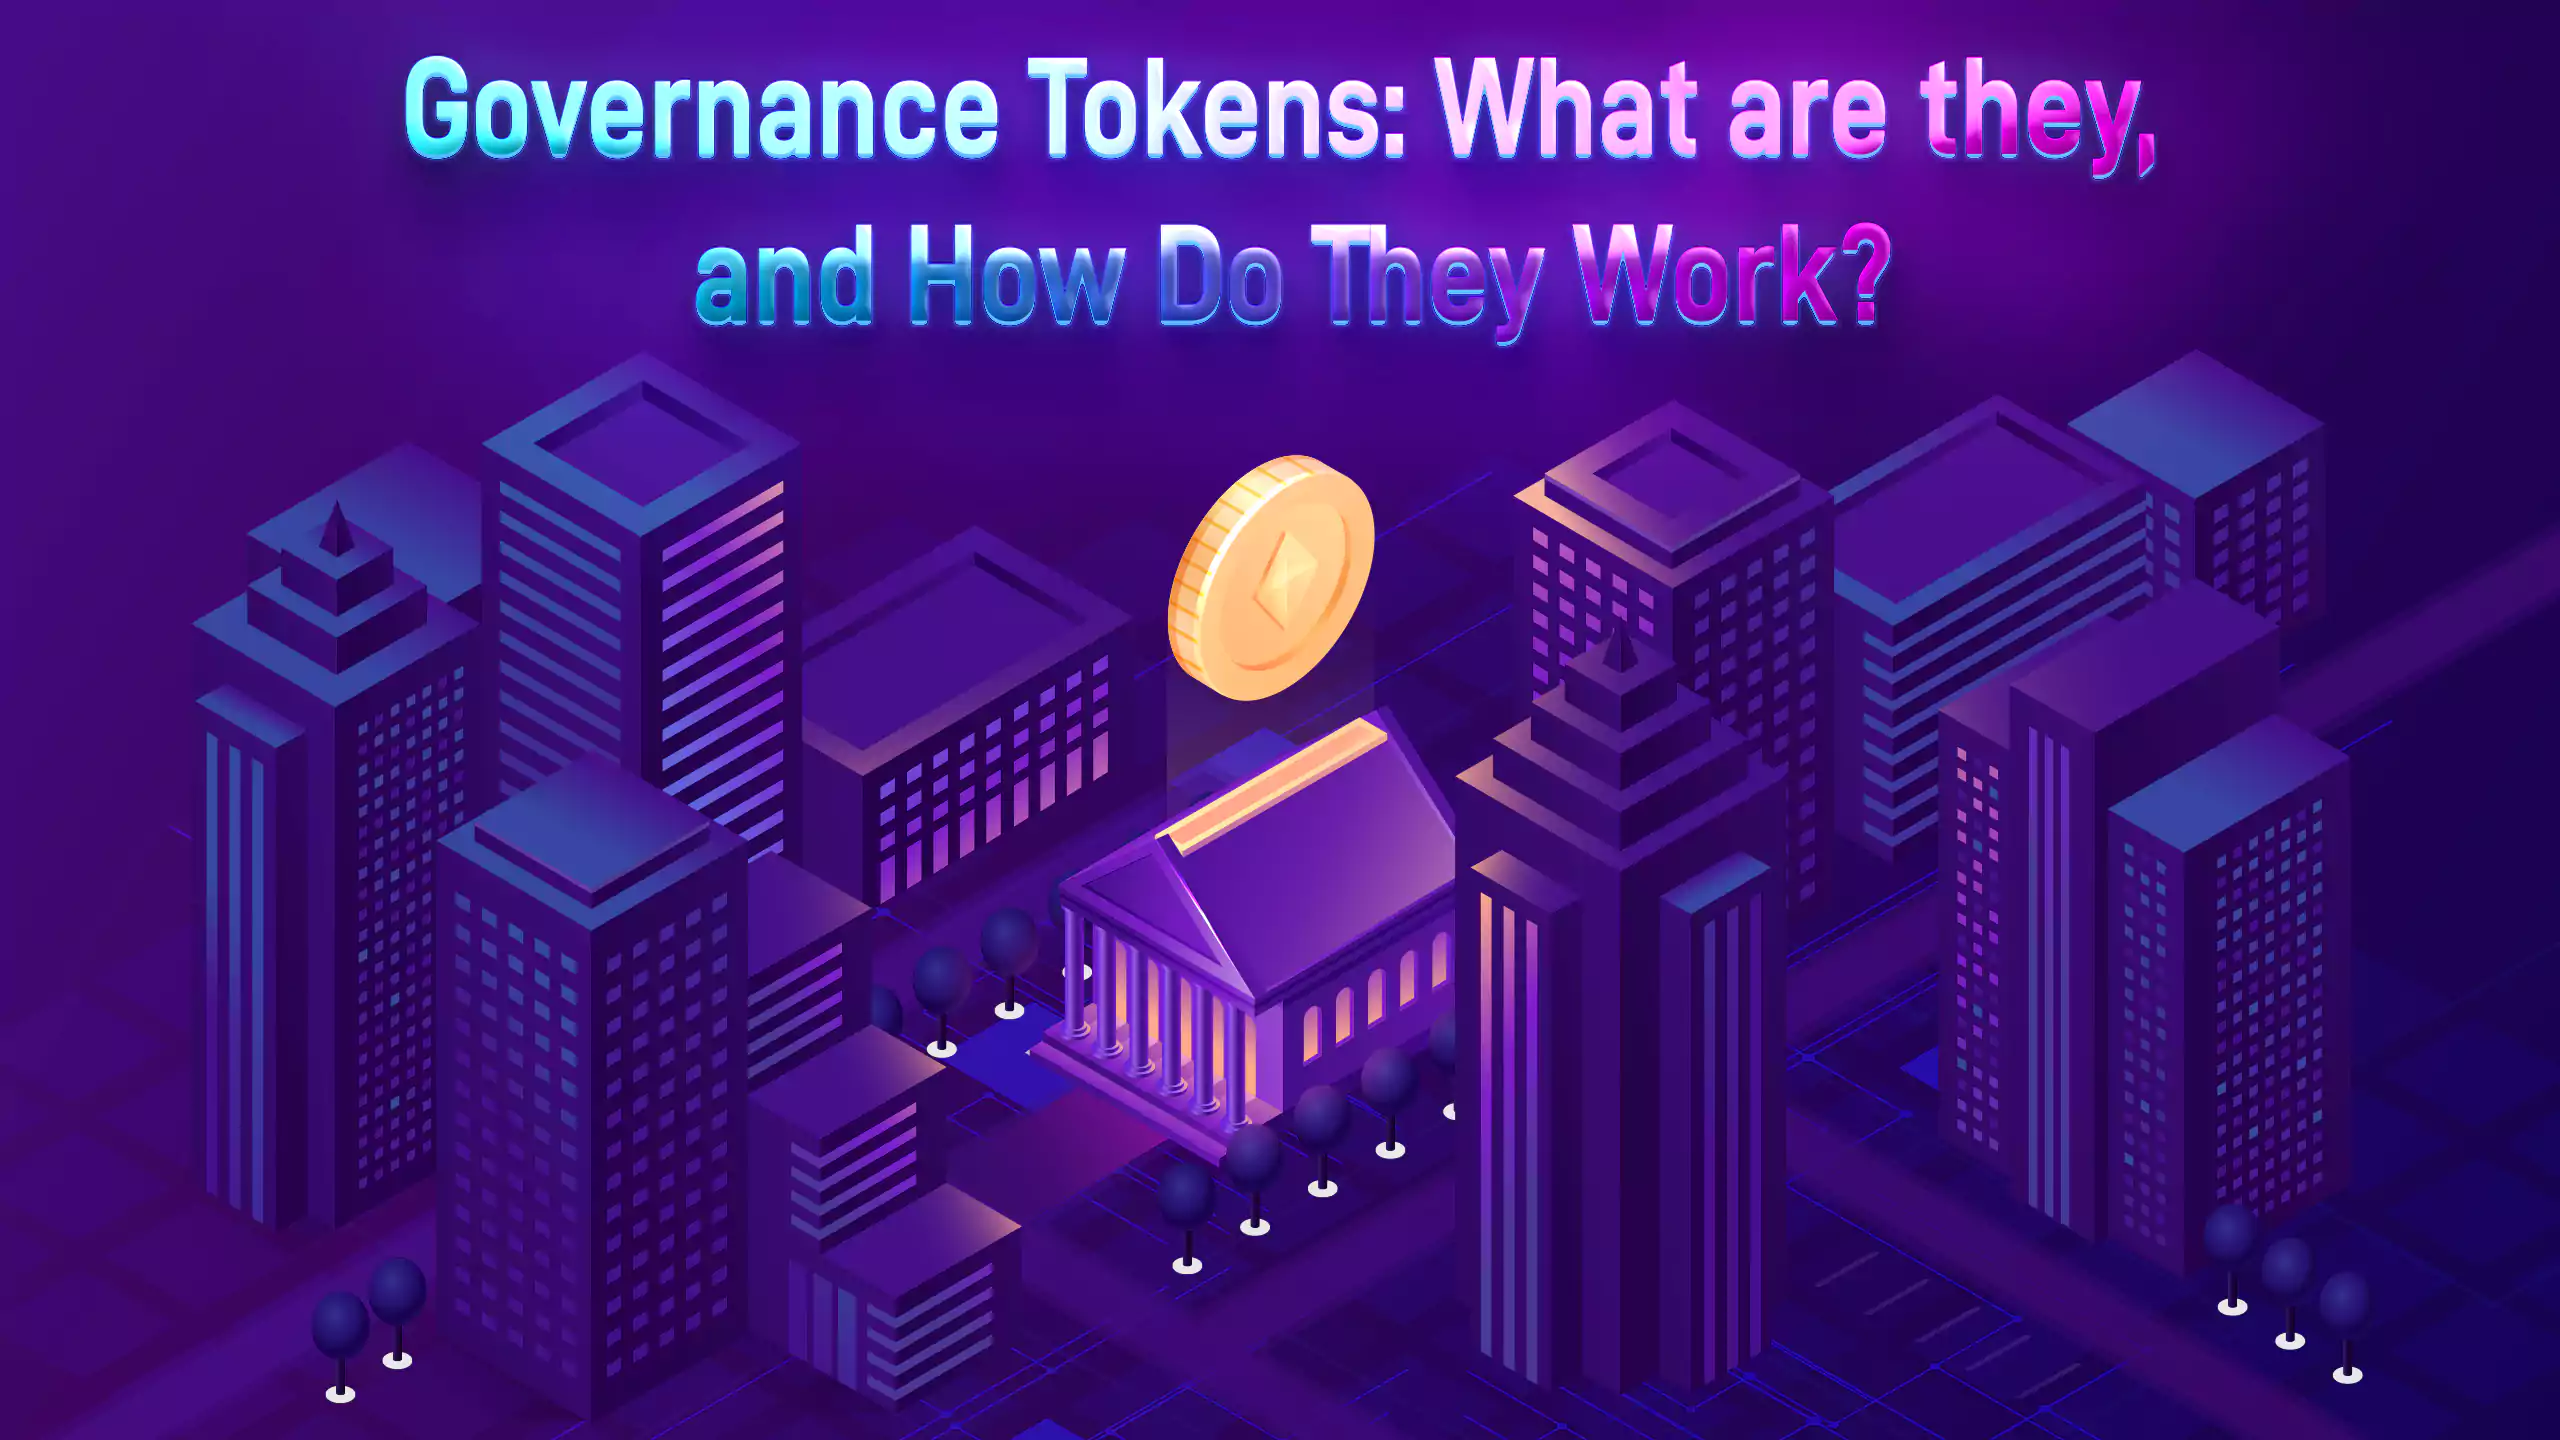 Governance Tokens: What are they, and How Do They Work?